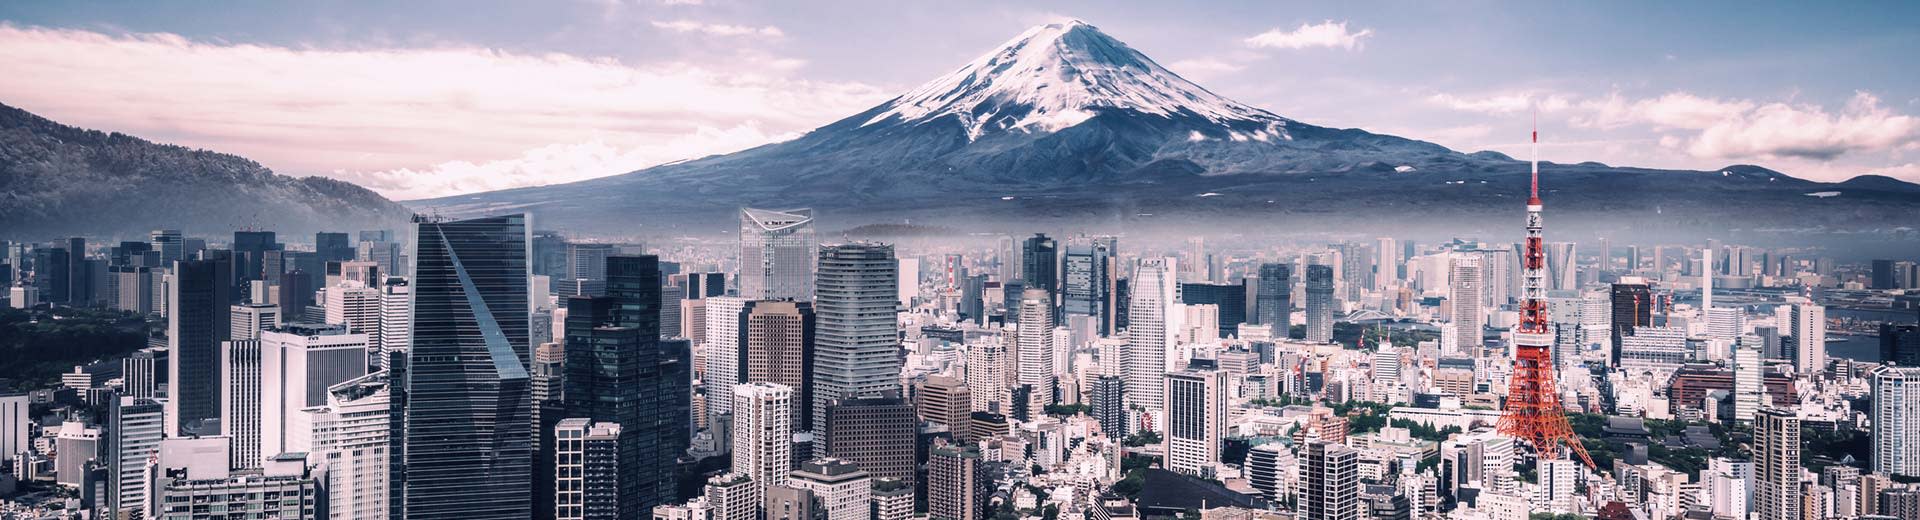 The sprawling city of Tokyo lies before the famous Mount Fuji, with more skyscrapers than you can count in the foreground.